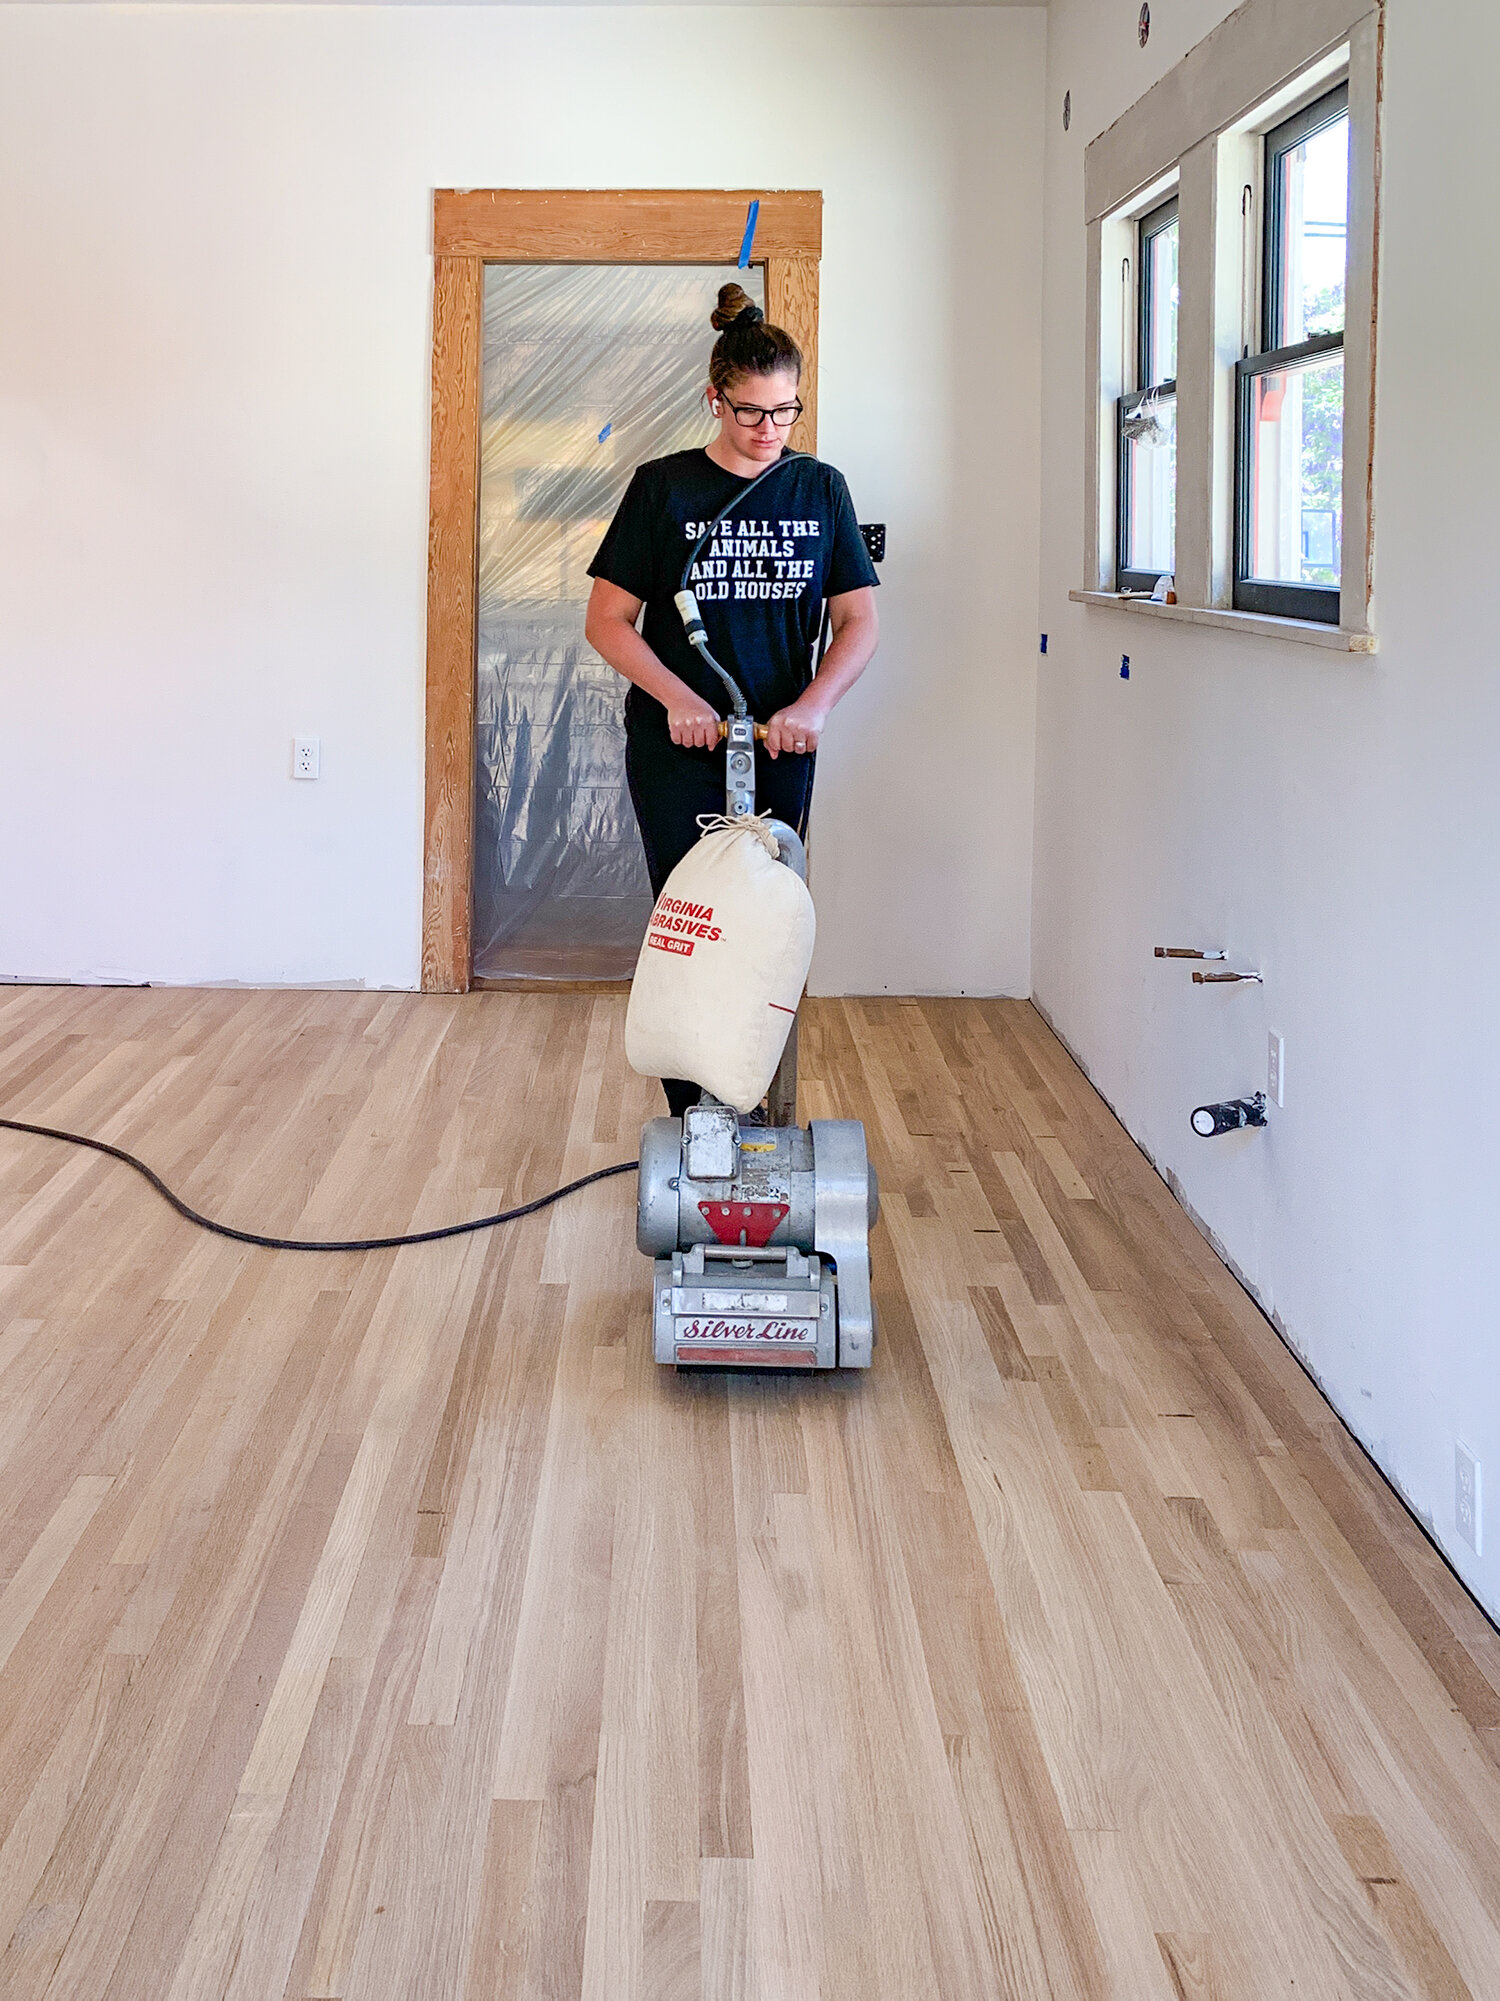 We Hit A Snag And Had To Refinish Our, How To Refurbish Hardwood Floors Yourself